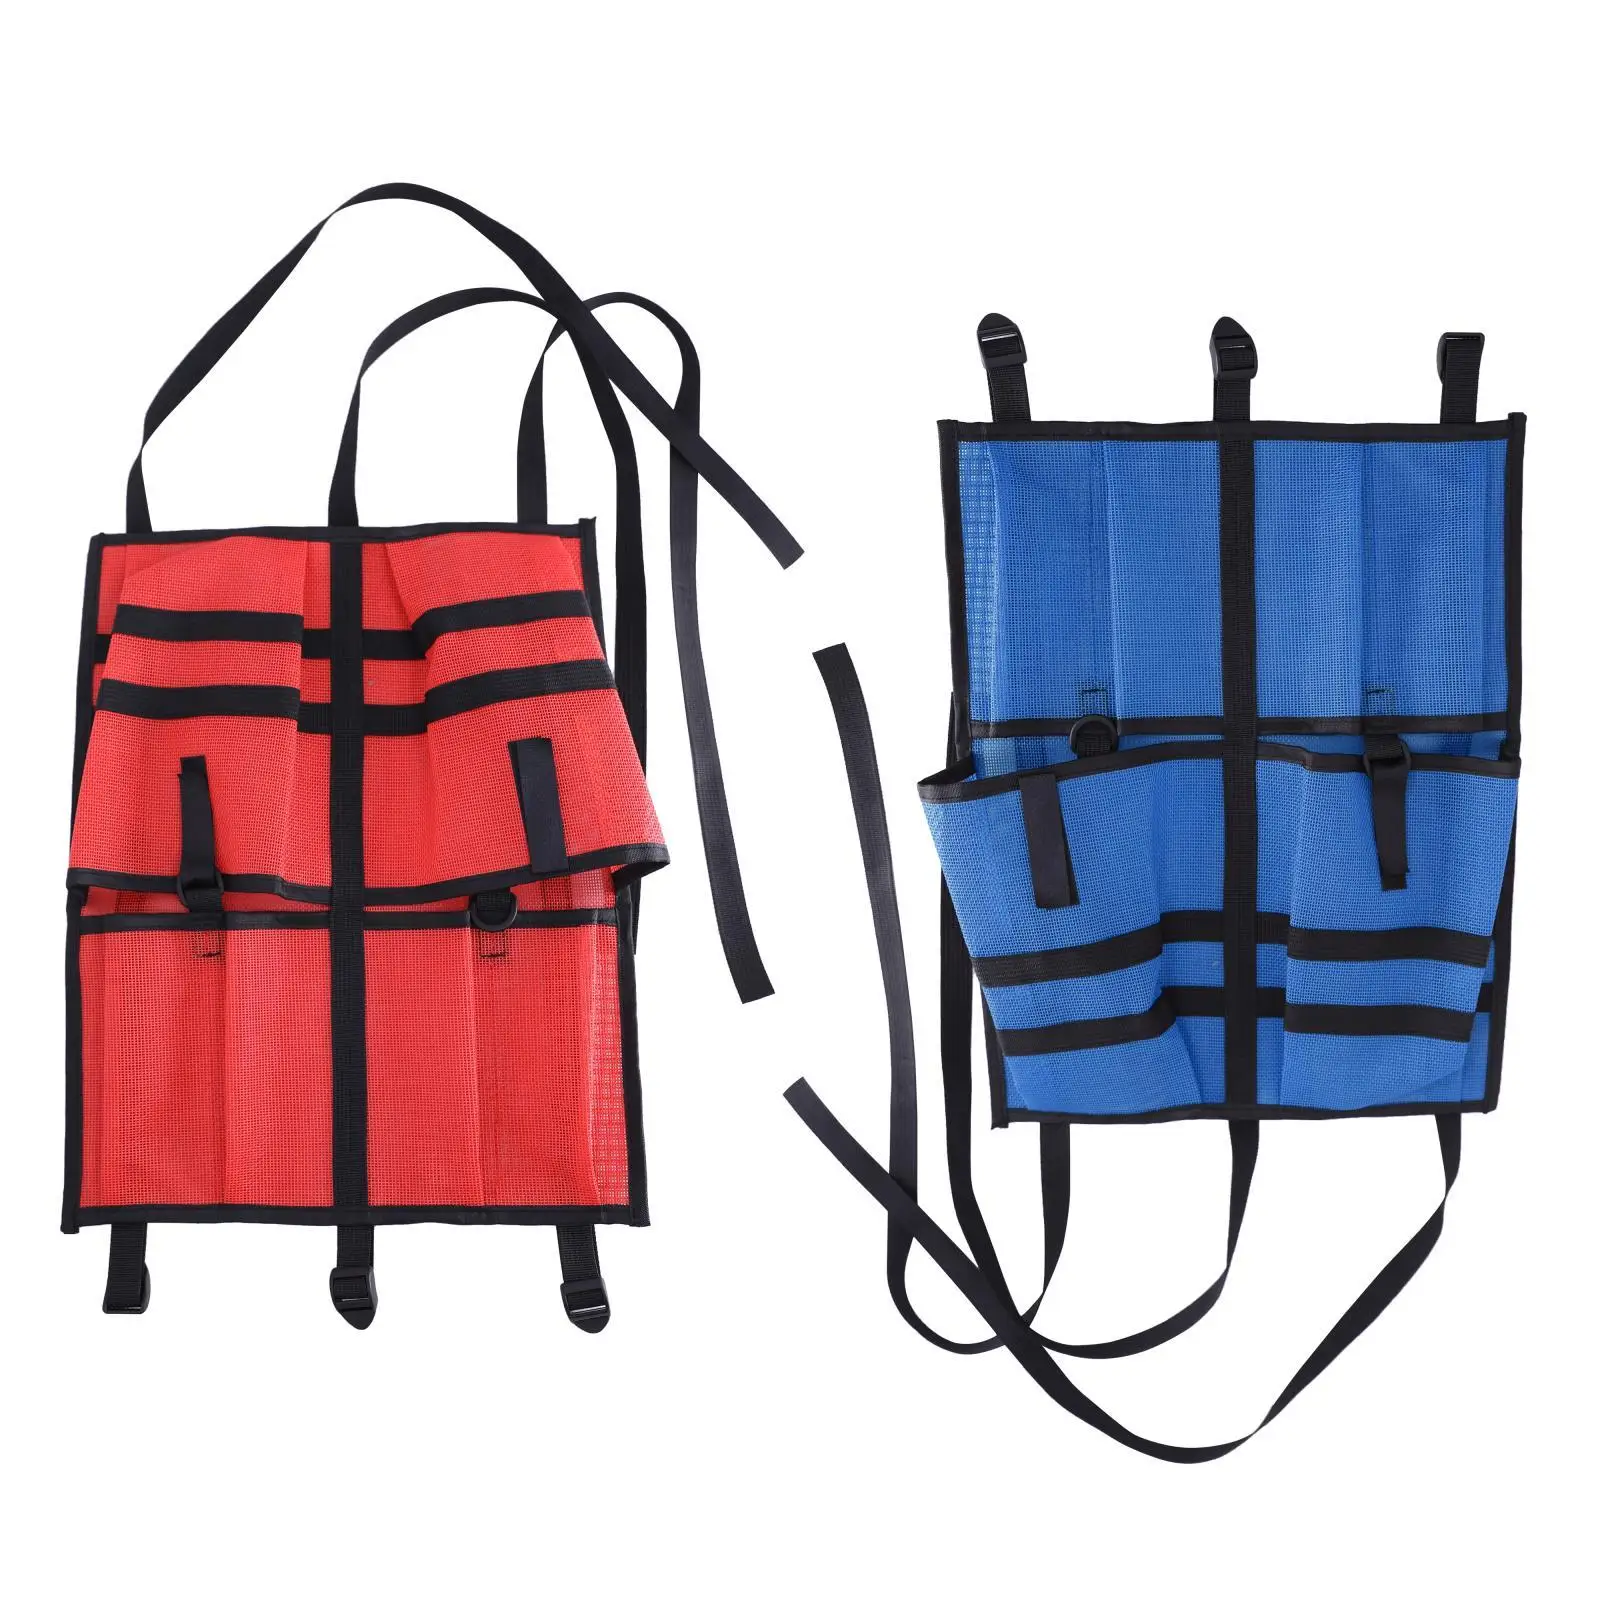 Durable Nylon Kayak Storage Mesh Bag Side Pouch Organizer Accessory Gear Holder Storage for Vehicle and Much More Fishing Canoe